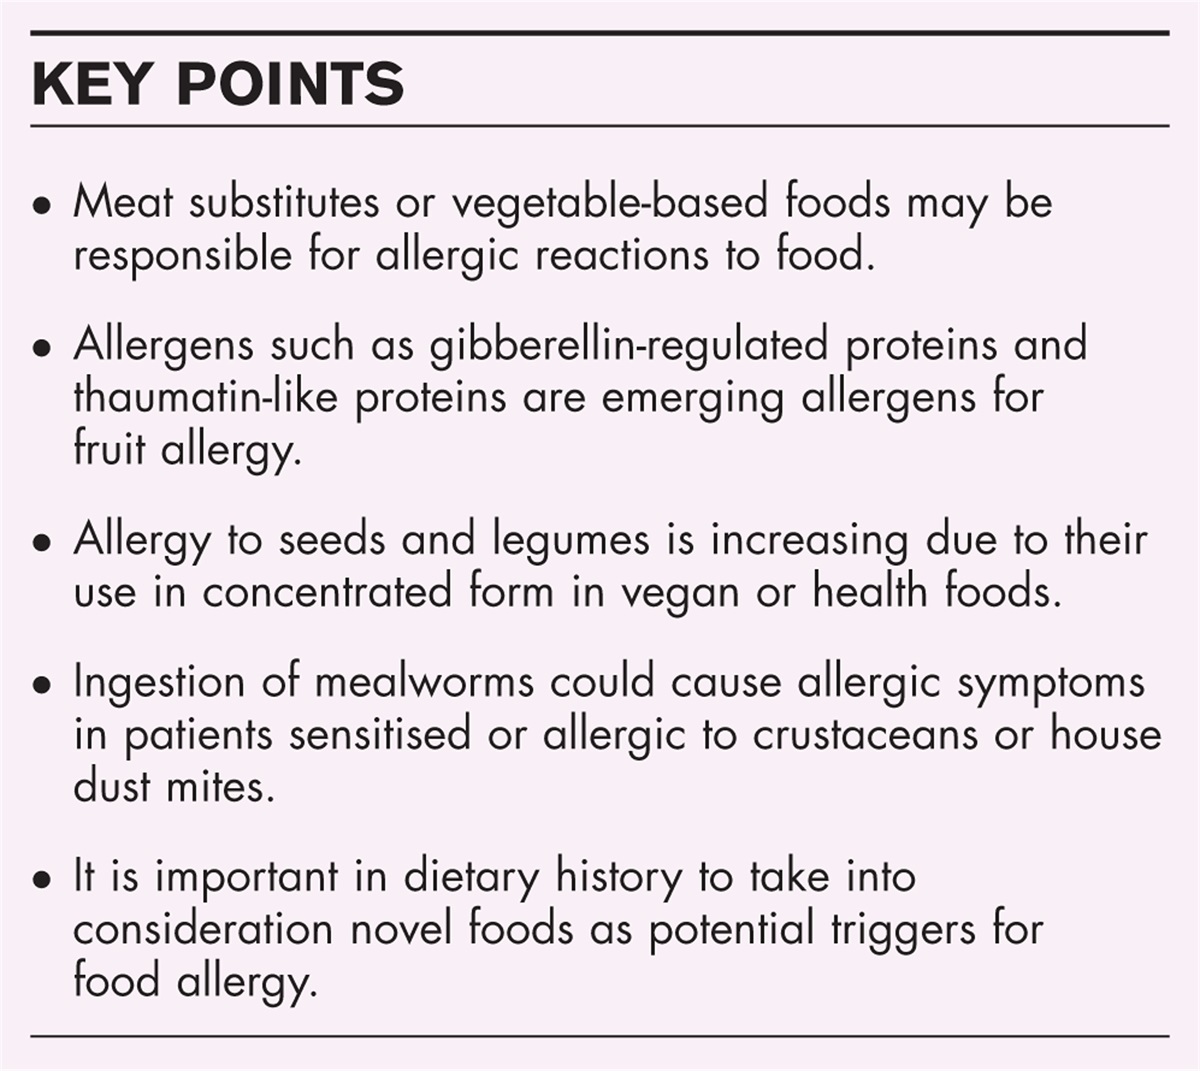 New arrivals in anaphylaxis to foods